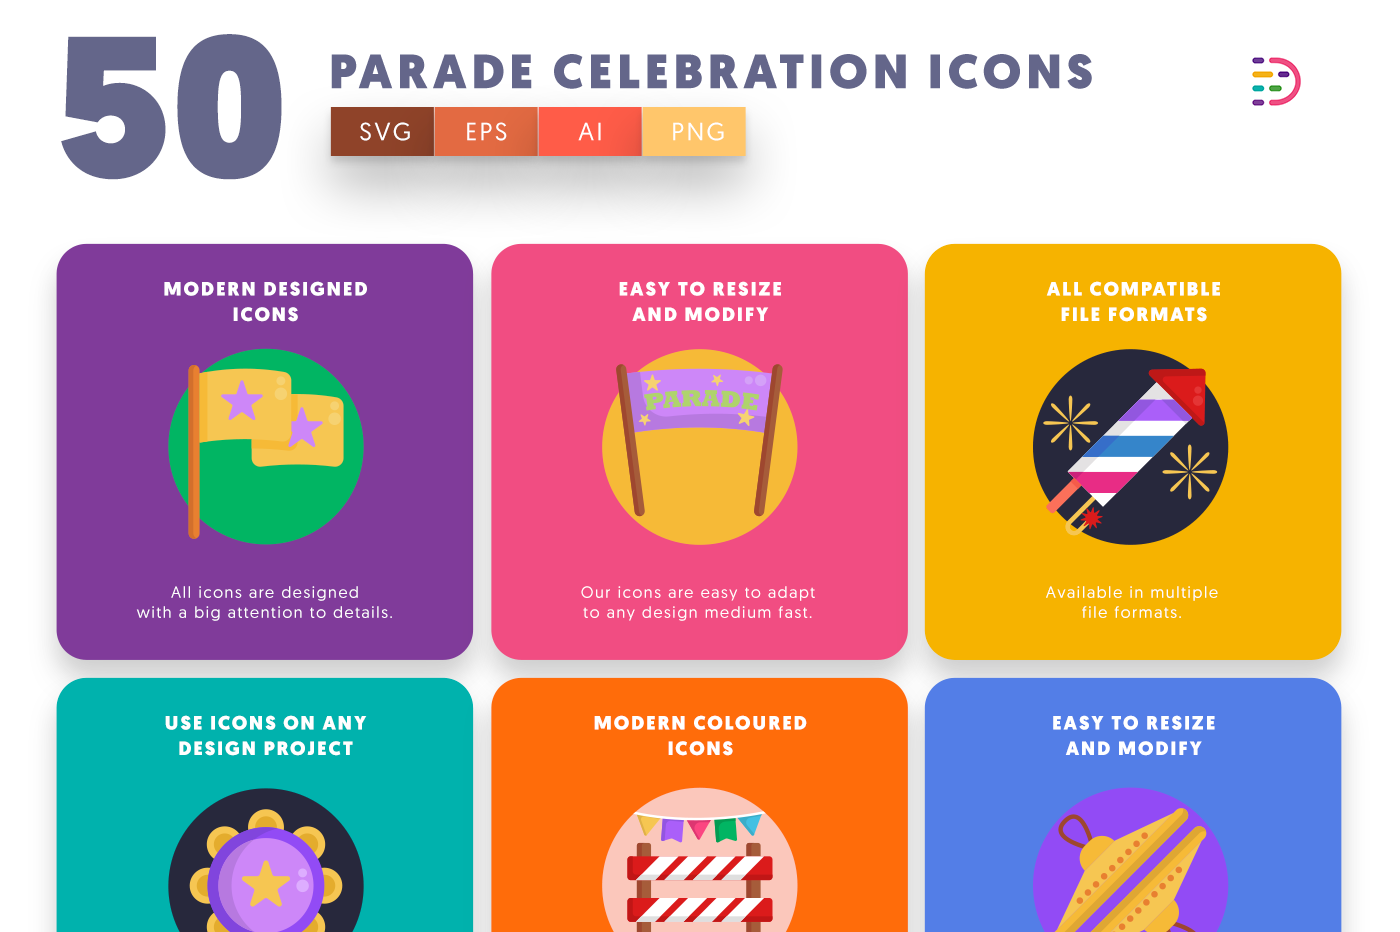 50 Parade Celebration Icons with colored backgrounds 